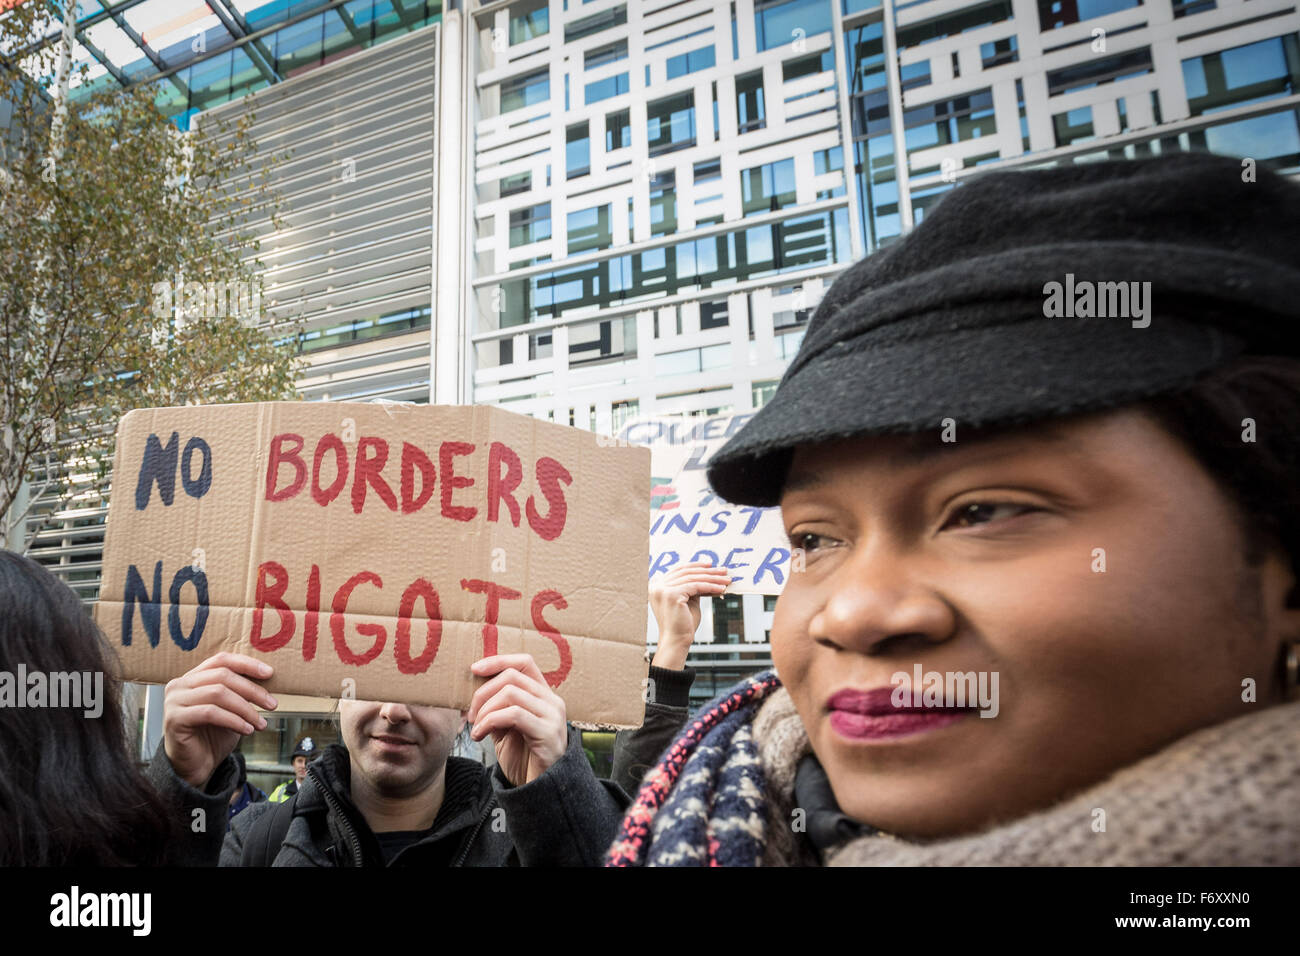 London, UK. 21st November, 2015. “No Borders No Bigots” LGBTI support for migrants protest and rally outside Home Office against hostile immigration policies Credit:  Guy Corbishley/Alamy Live News Stock Photo